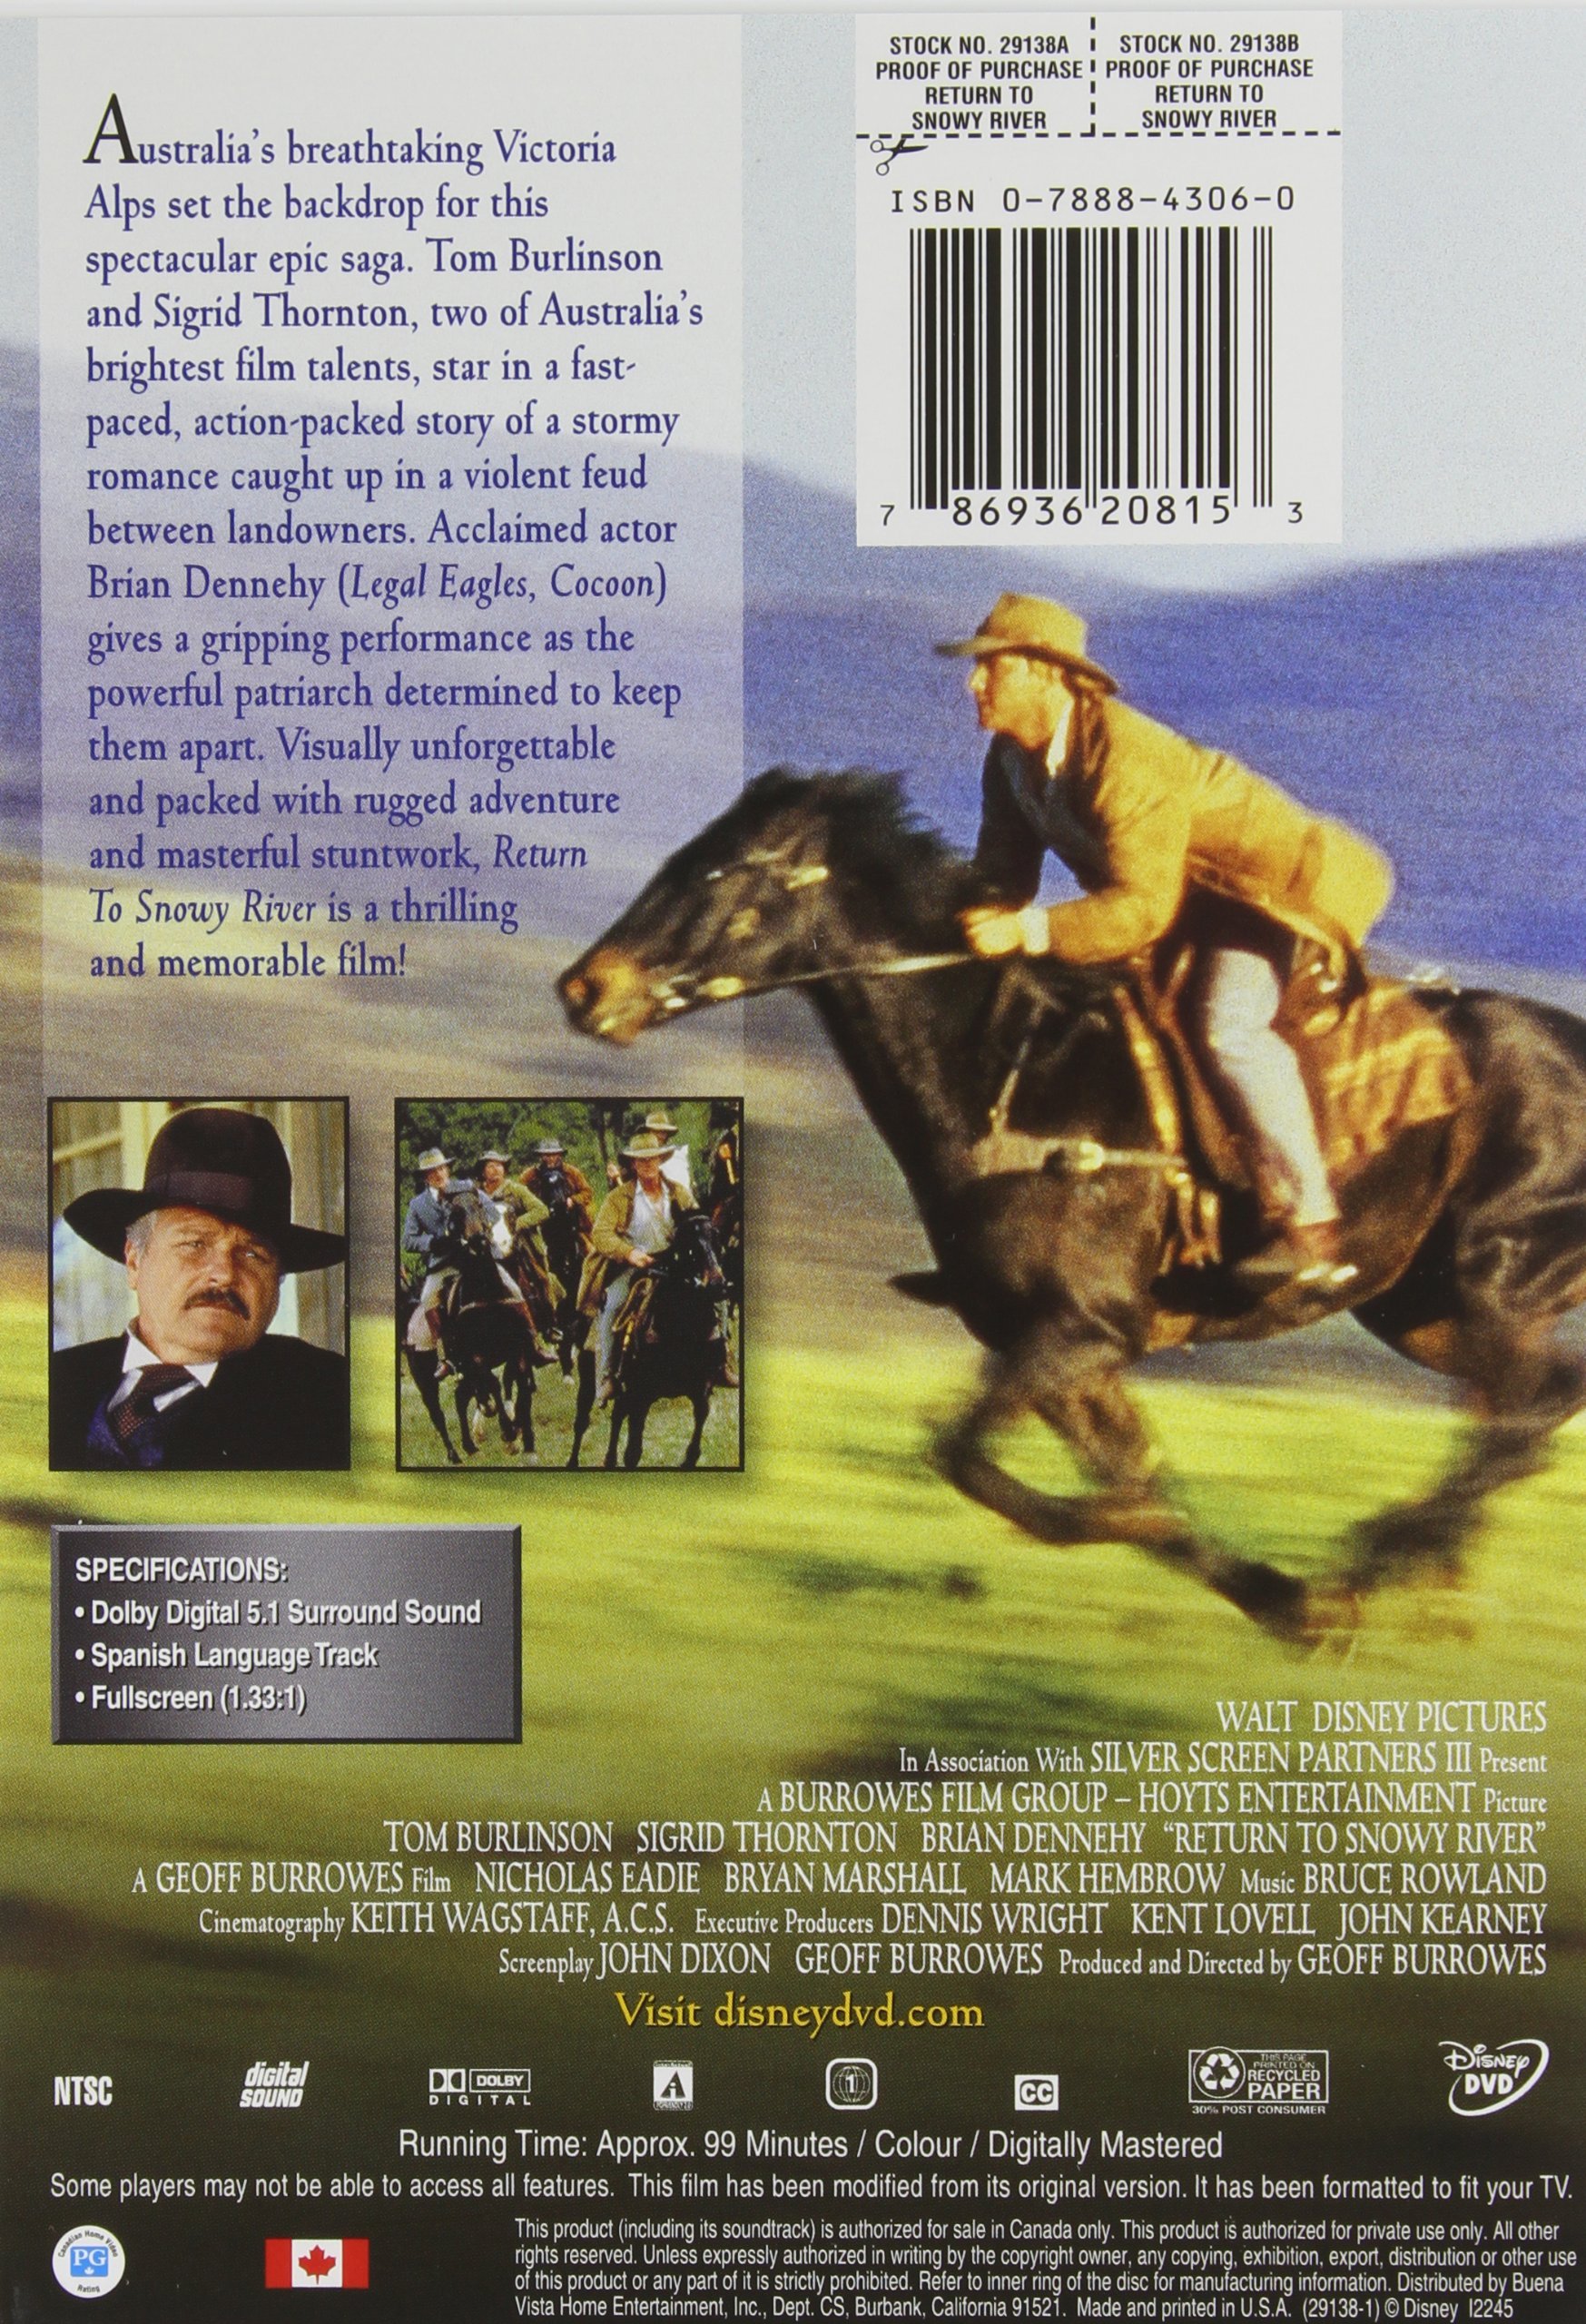 Return to Snowy River (DVD), Mill Creek, Action & Adventure - image 2 of 2